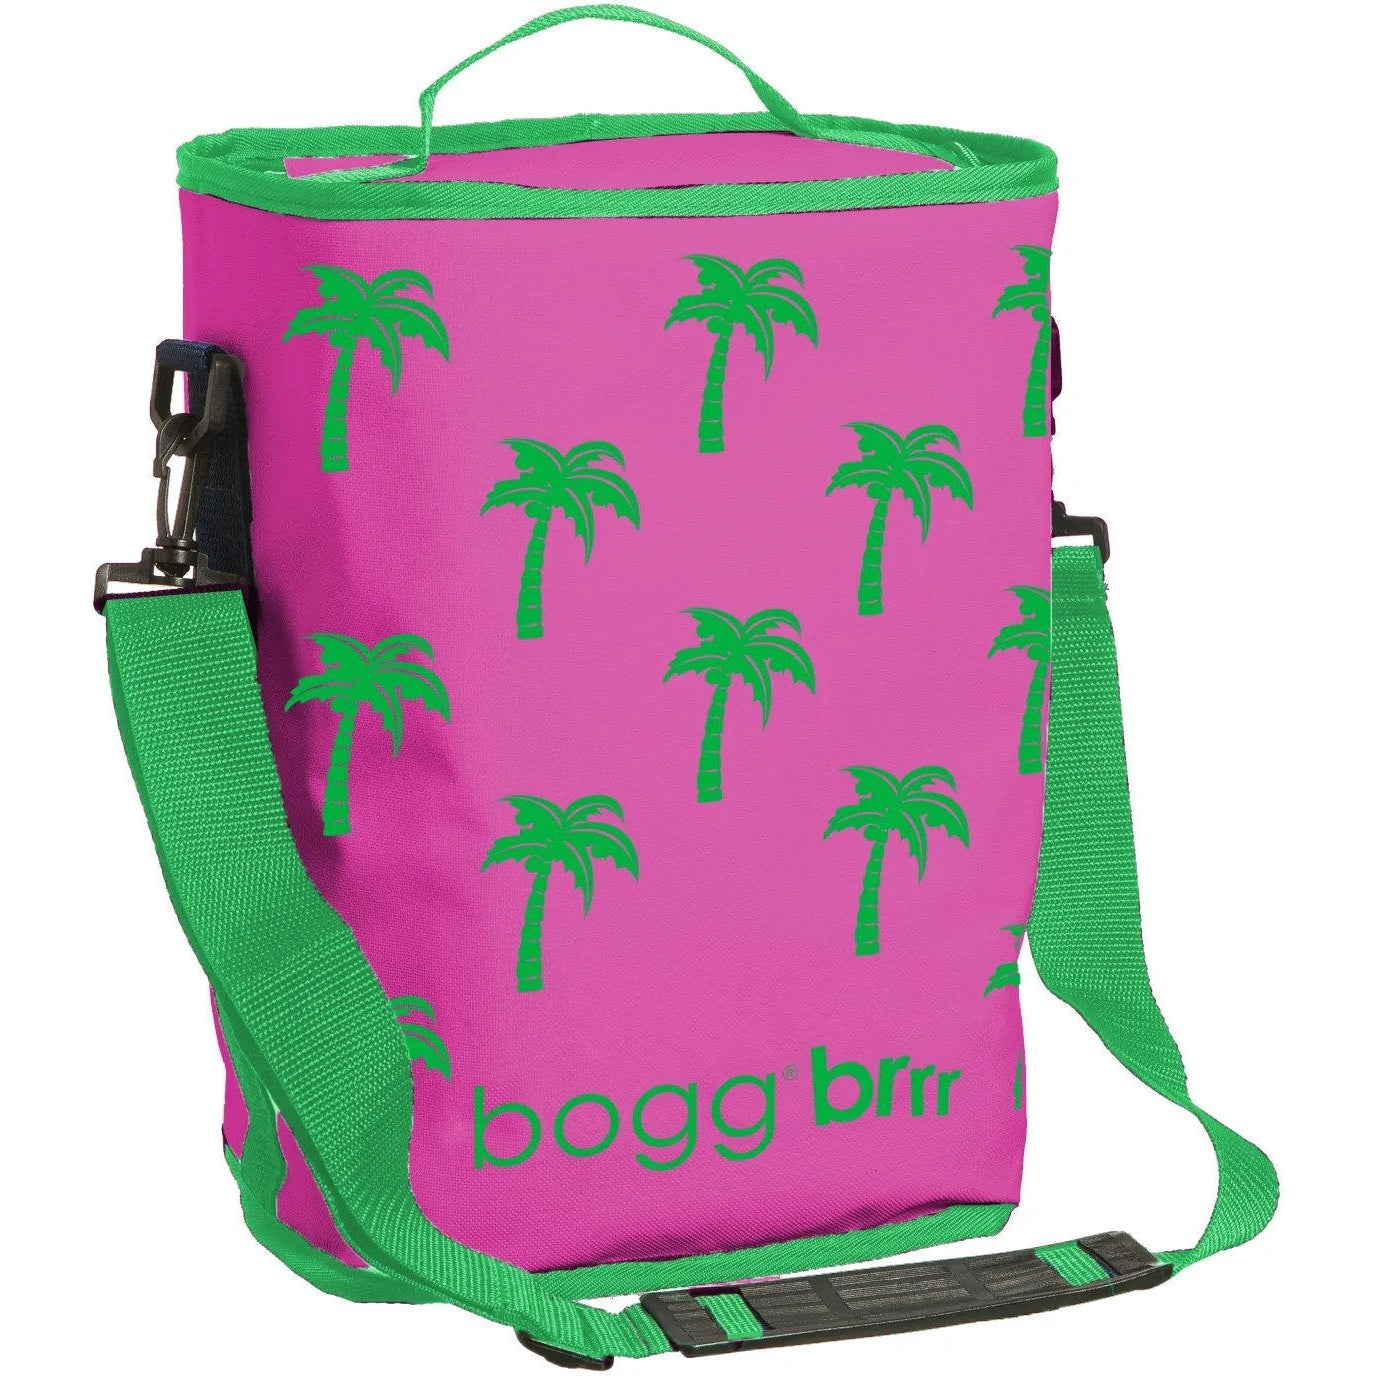 Pin on BOGG Bags